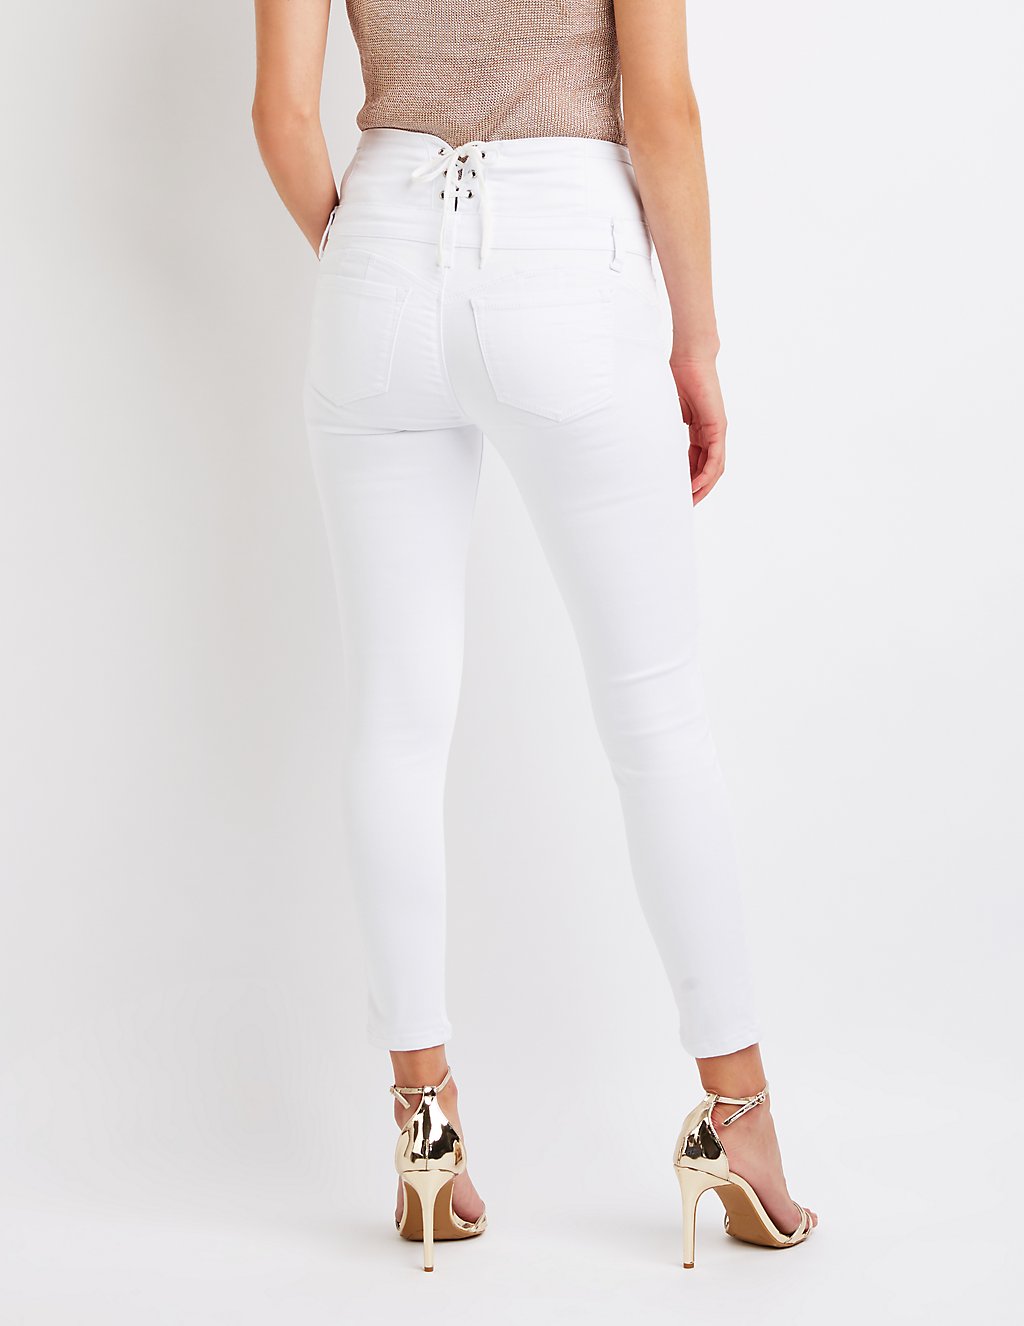 Lace Up High Waist Skinny Jeans